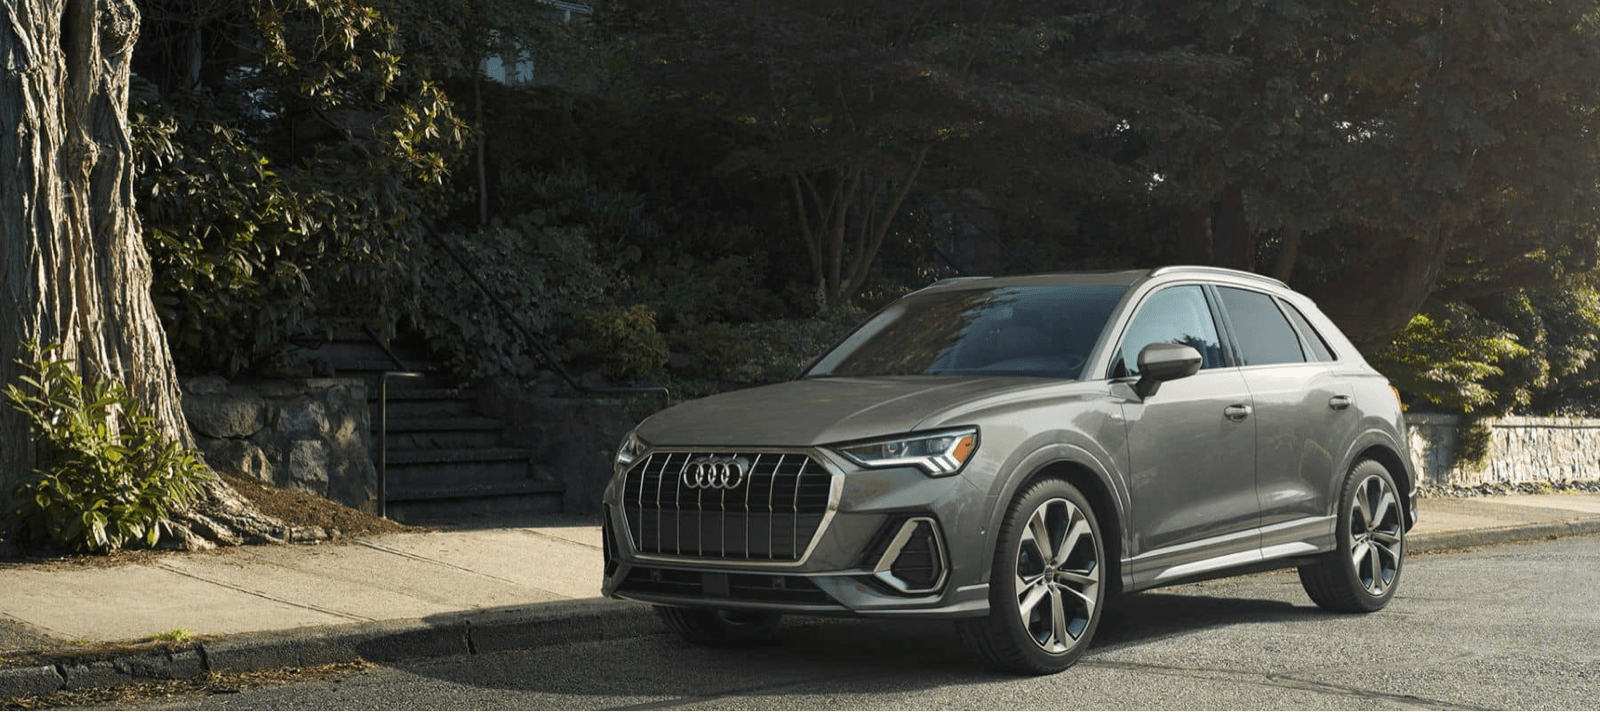 Audi Q7 parked in tree lined street